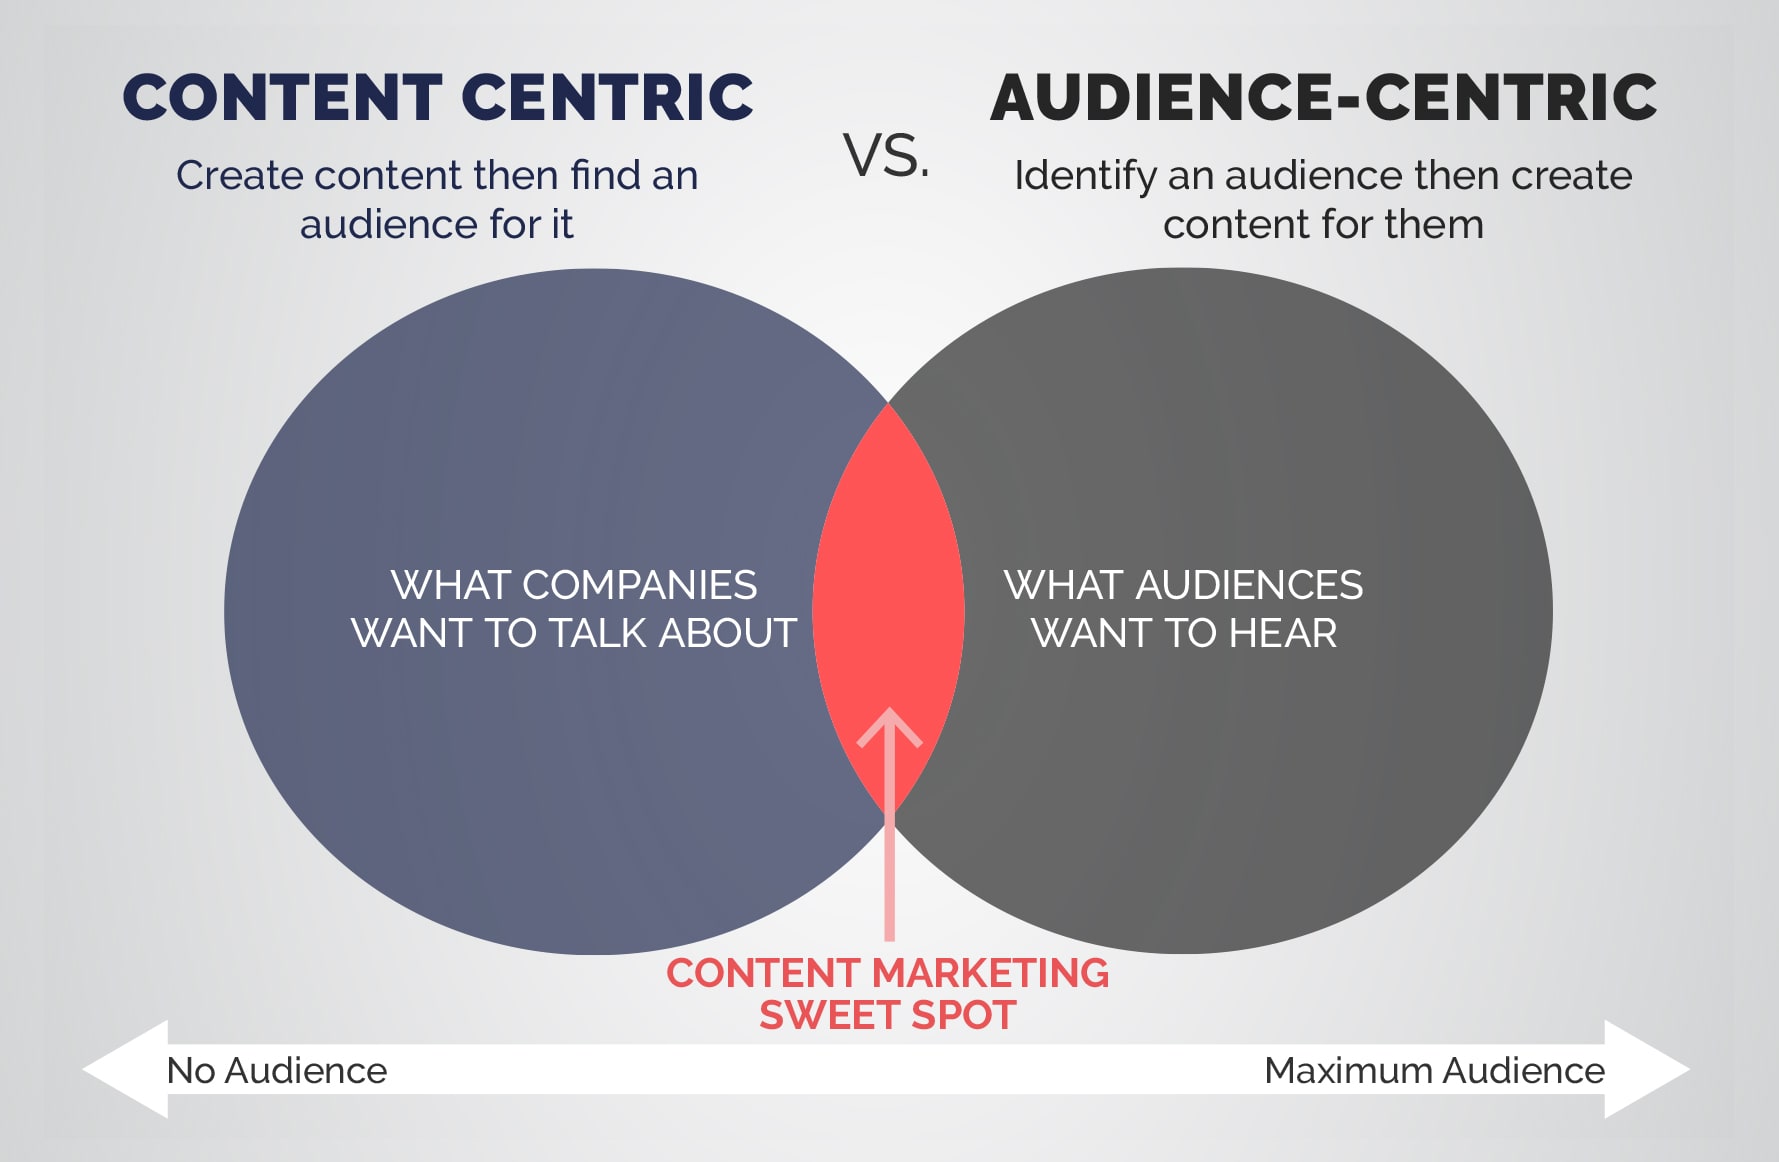 What is the opposite of content marketing?